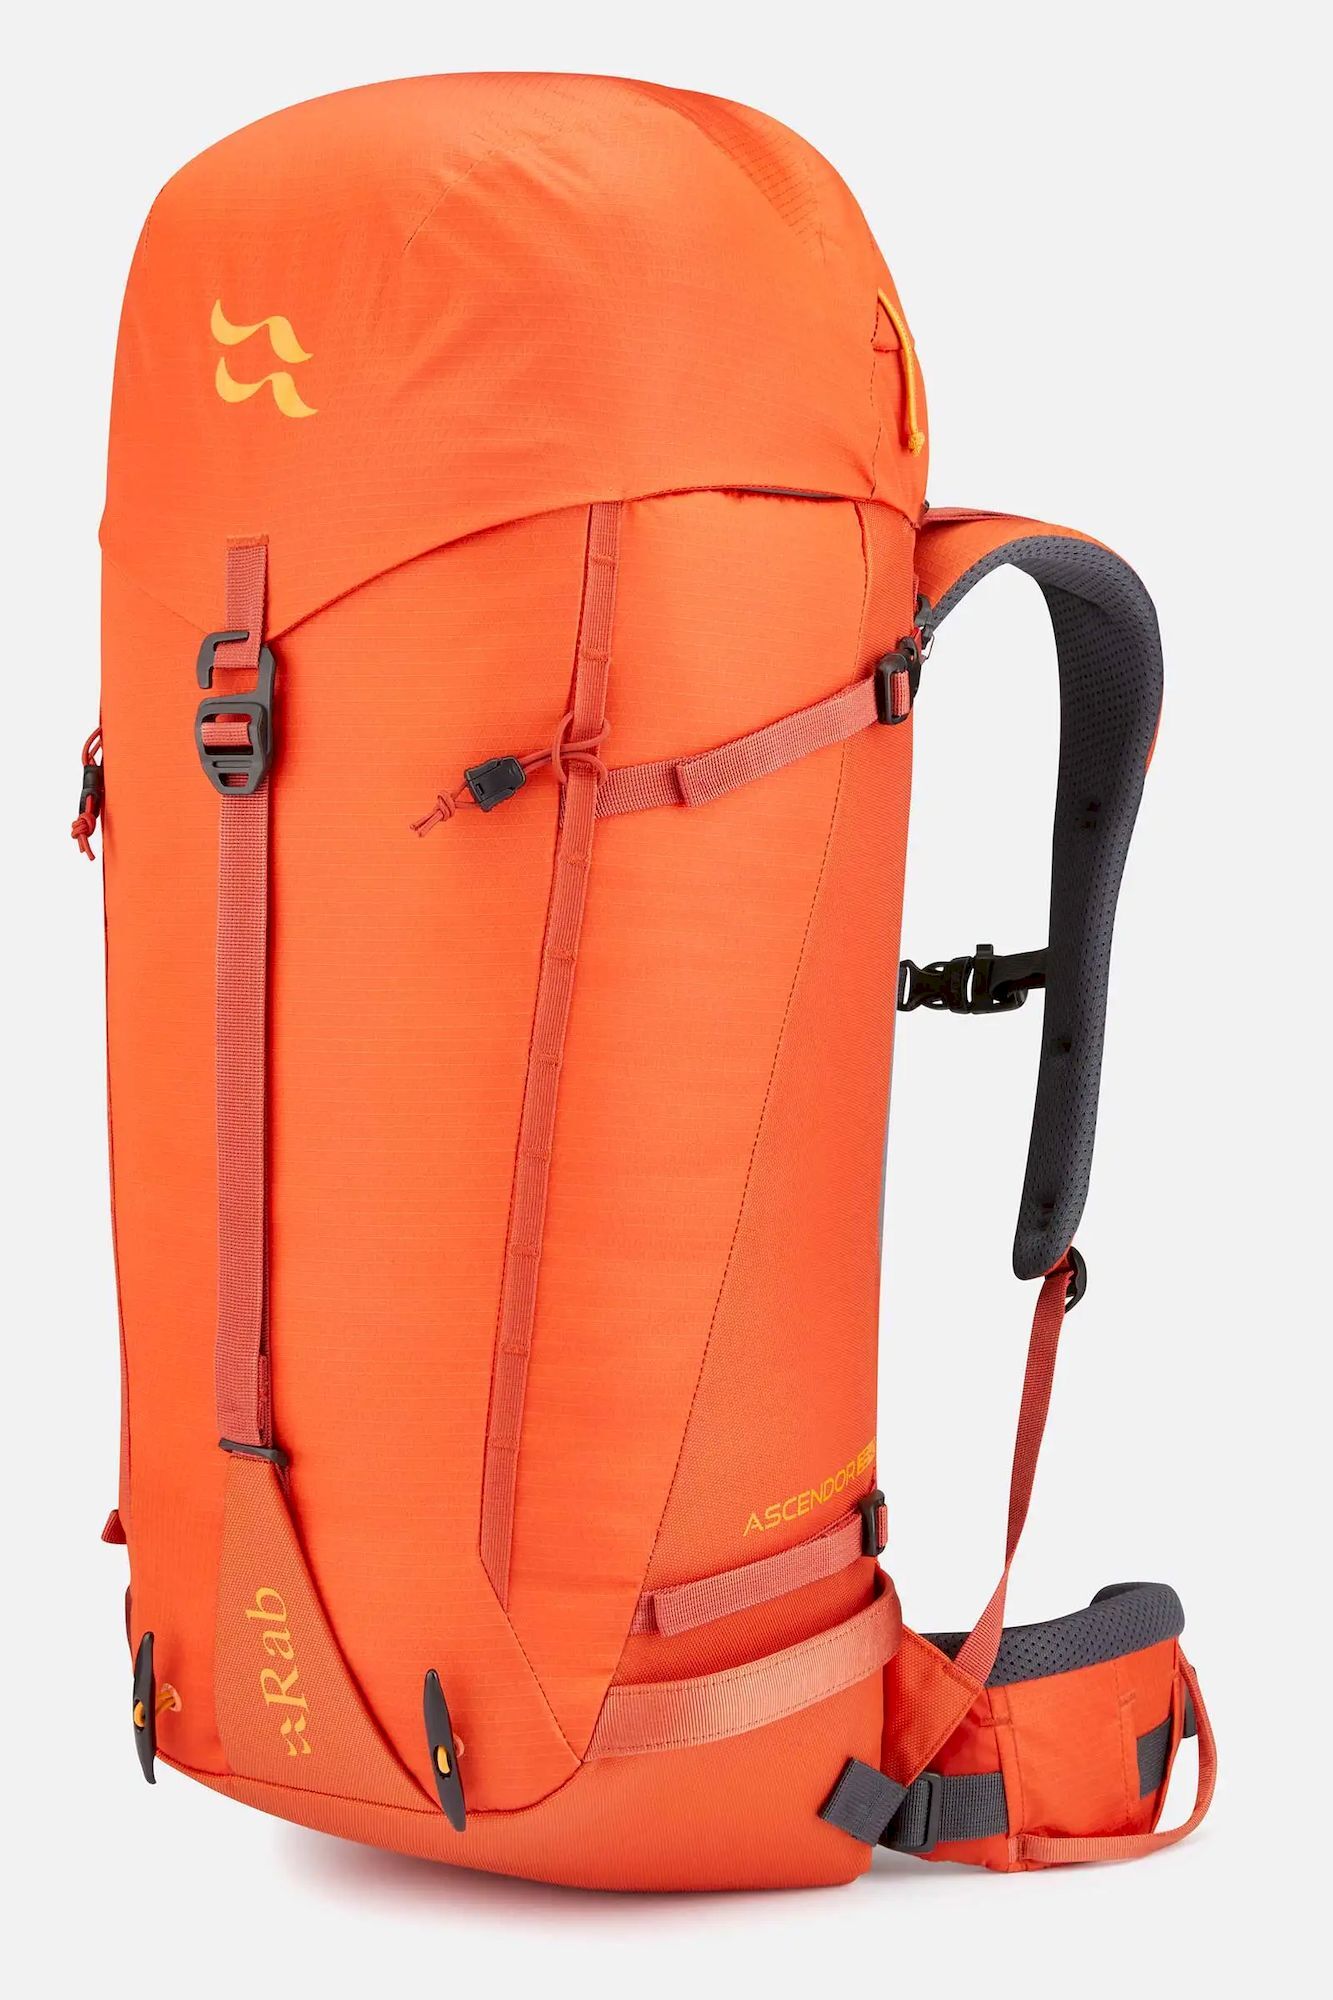 Rab Ascendor 35:40 - Mountaineering backpack